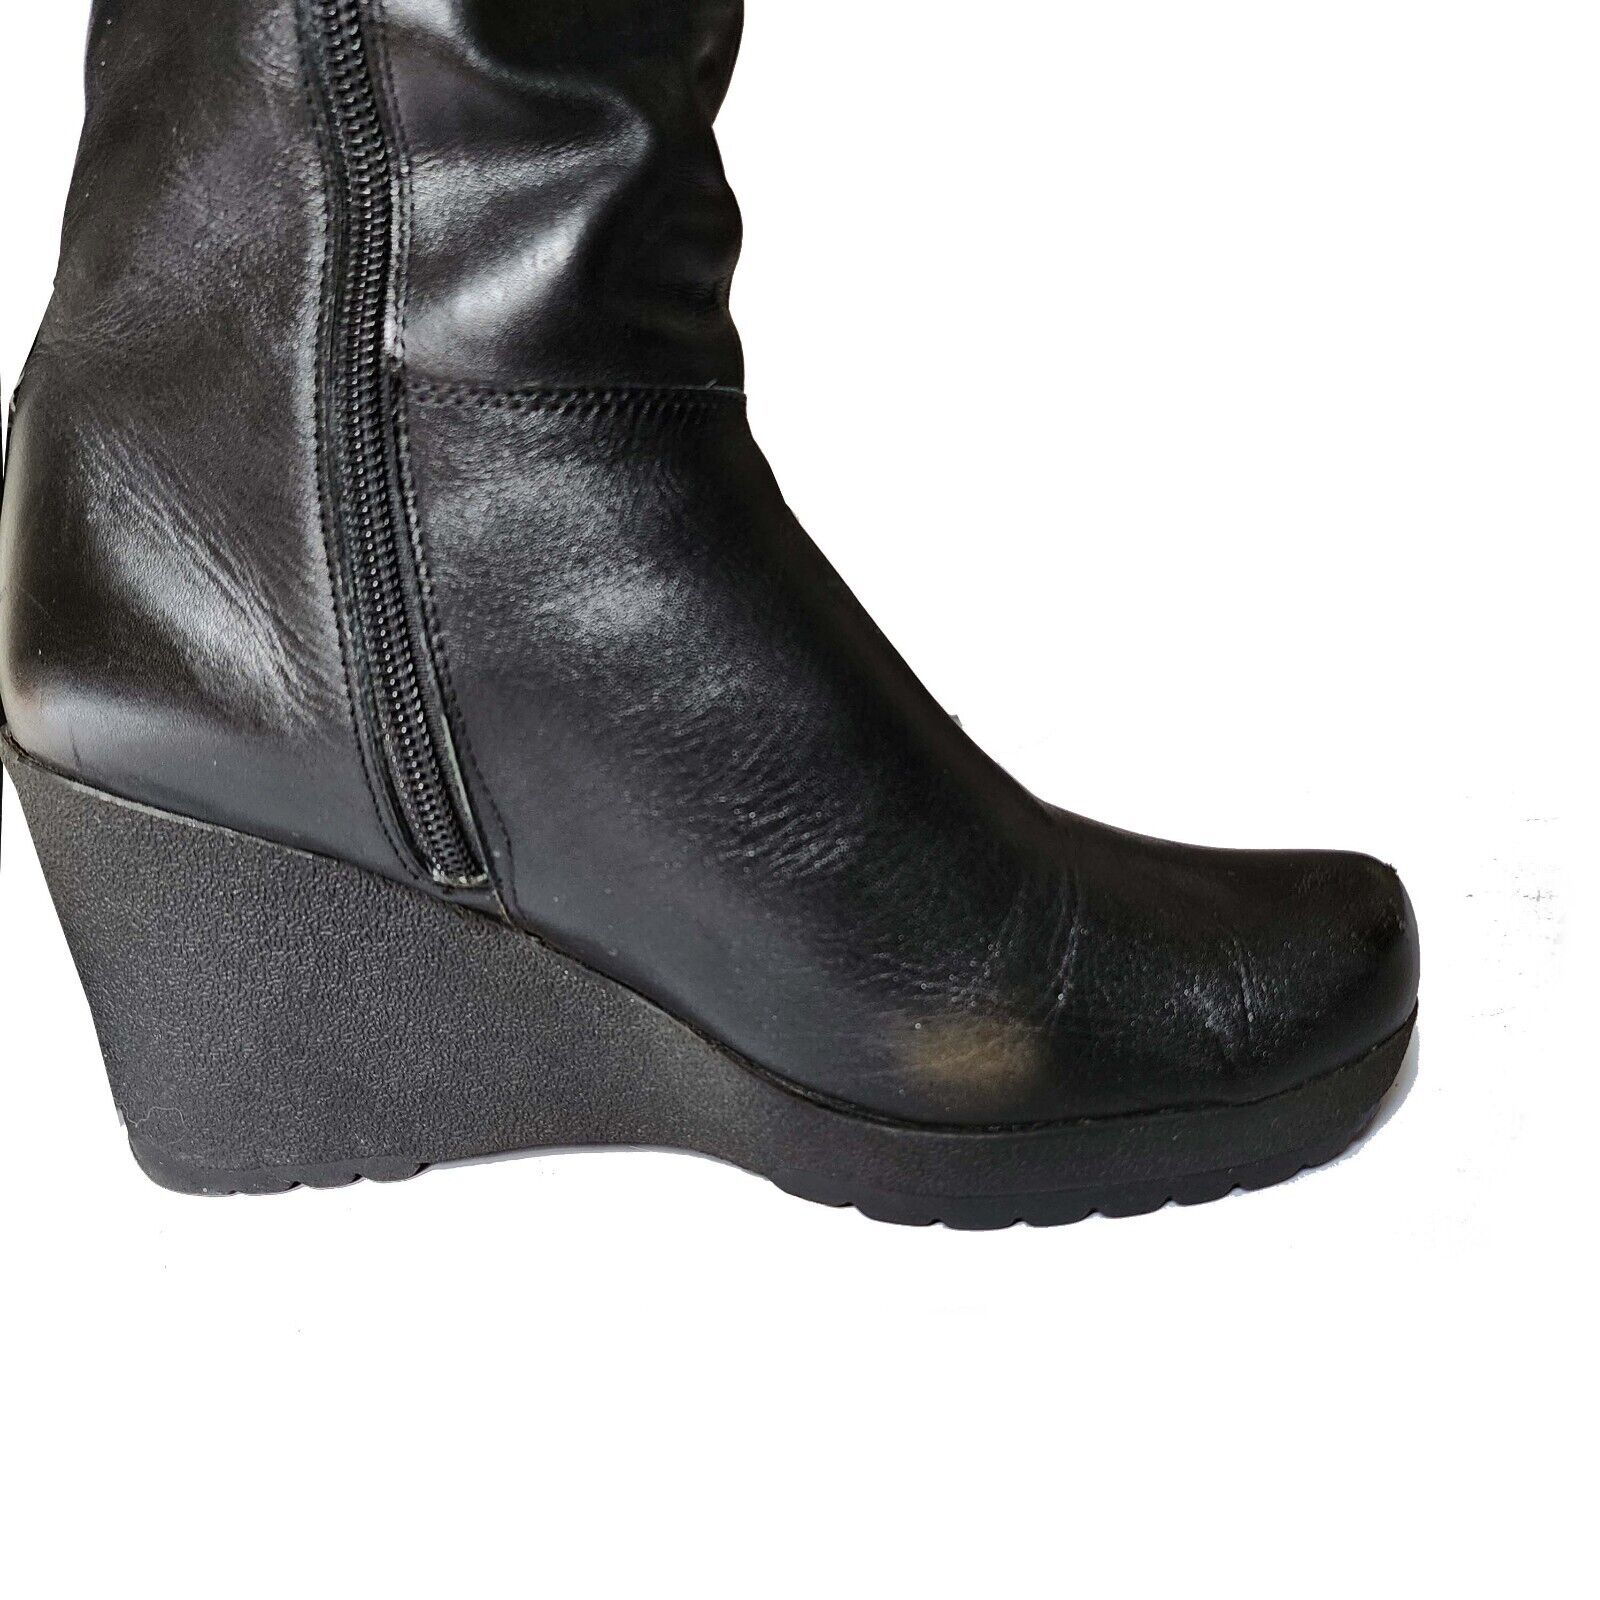 ROD Winter Boots - image 14